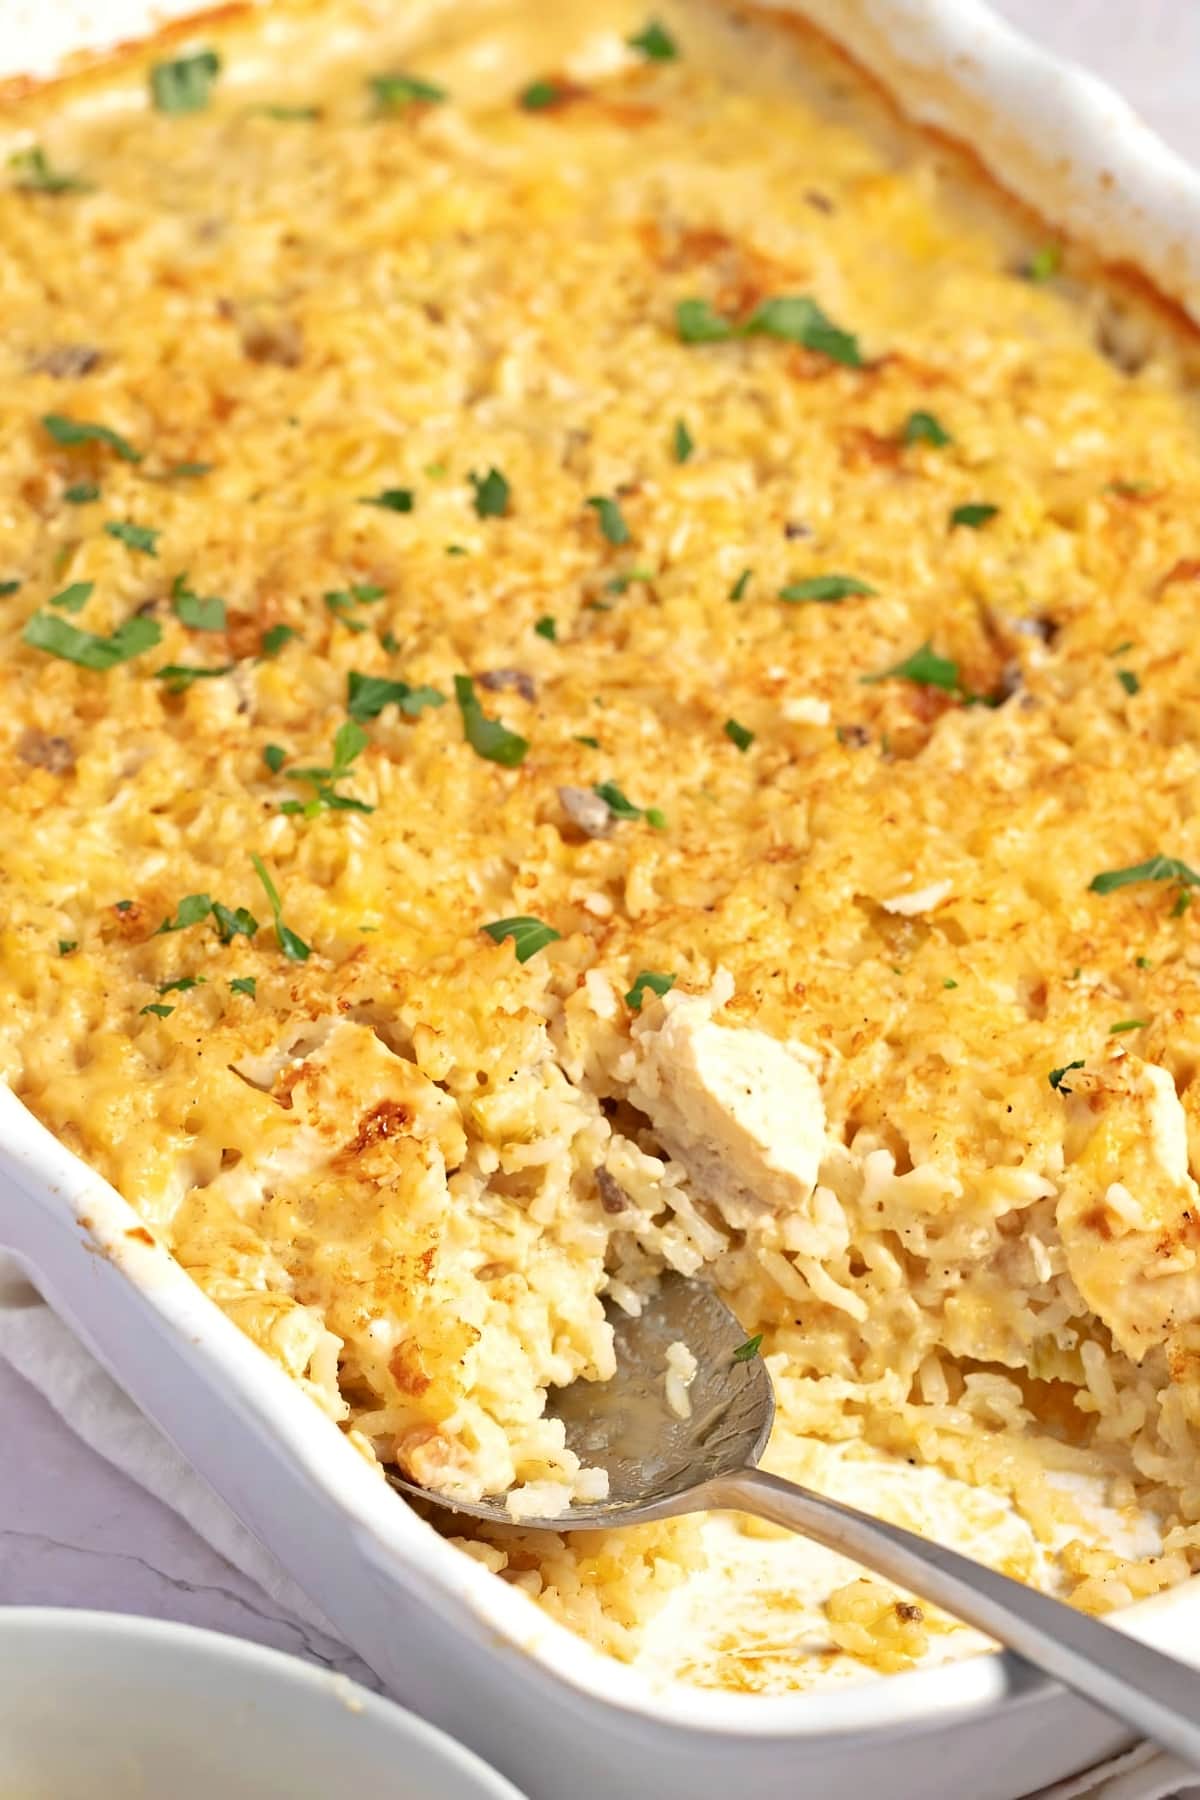 Chicken and rice casserole in a white dish, topped with golden breadcrumbs.